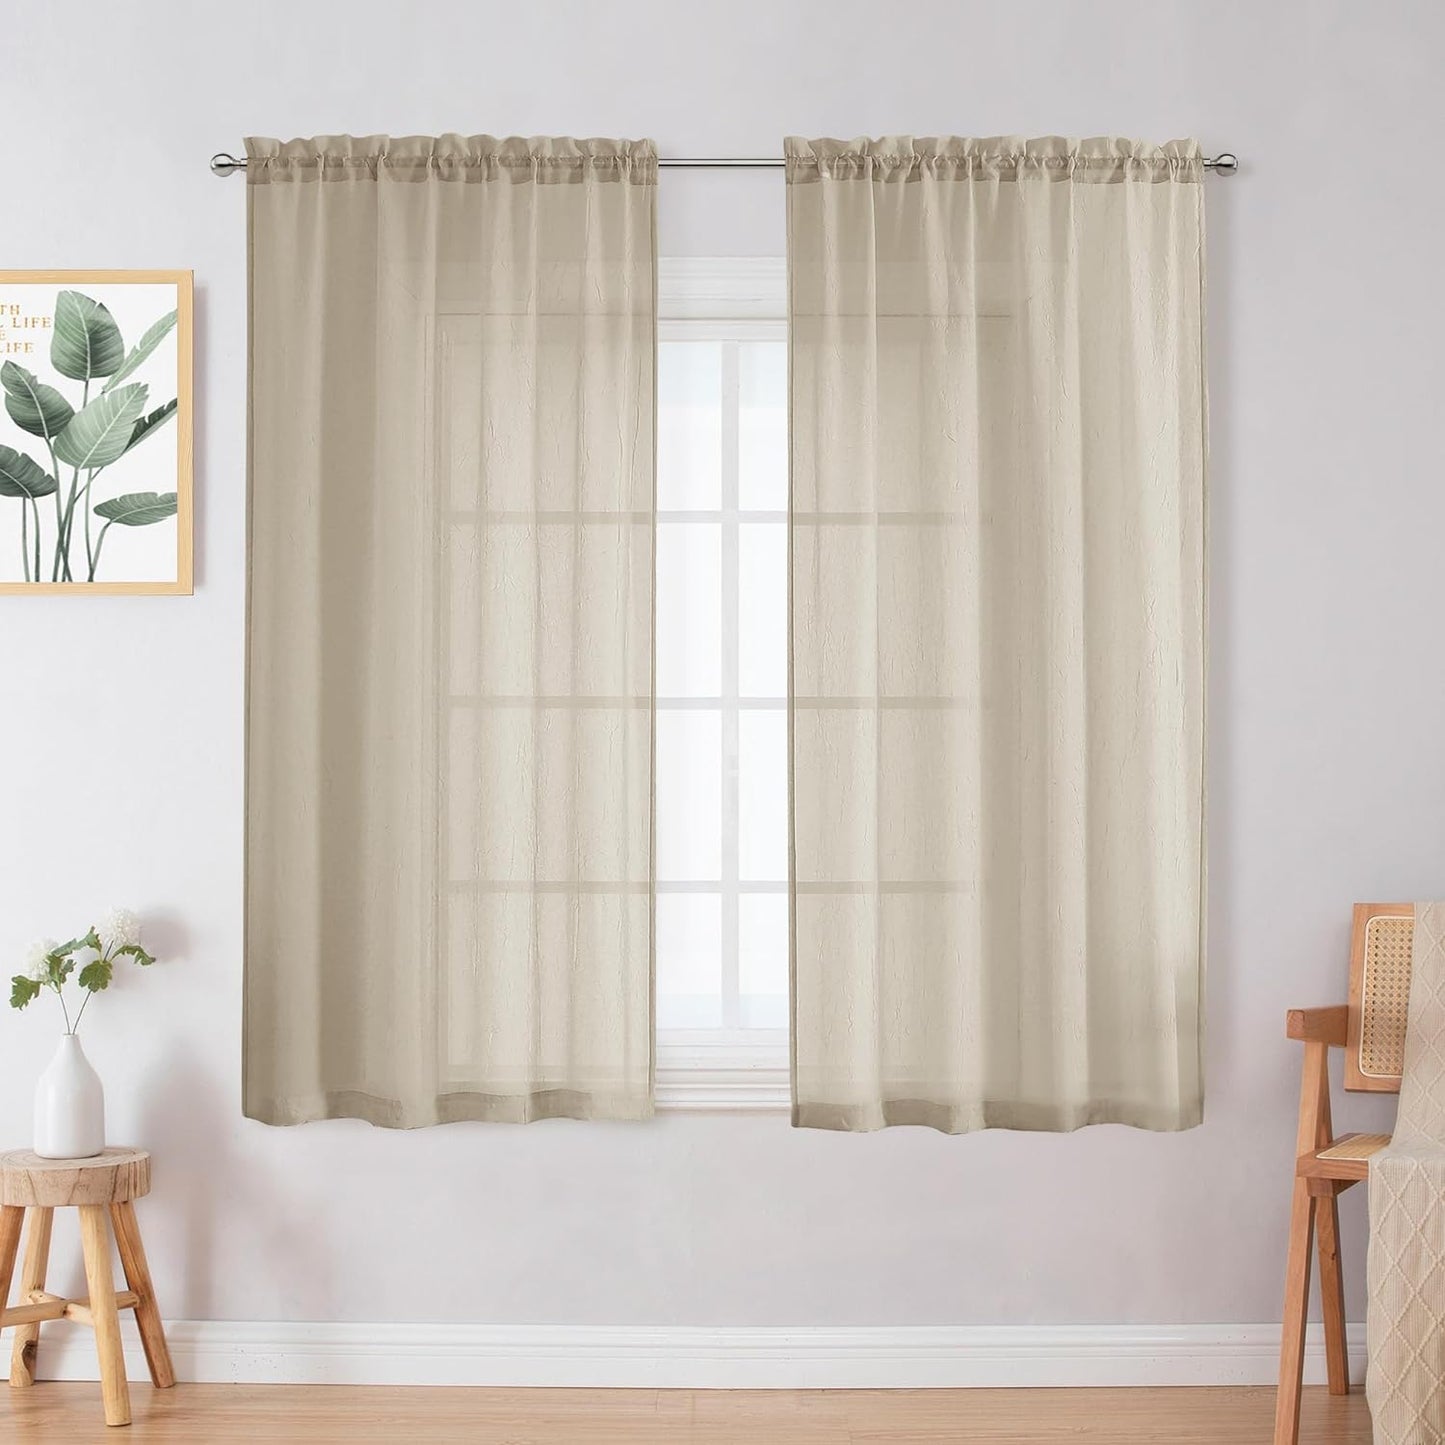 Chyhomenyc Crushed White Sheer Valances for Window 14 Inch Length 2 PCS, Crinkle Voile Short Kitchen Curtains with Dual Rod Pockets，Gauzy Bedroom Curtain Valance，Each 42Wx14L Inches  Chyhomenyc Taupe 28 W X 45 L 